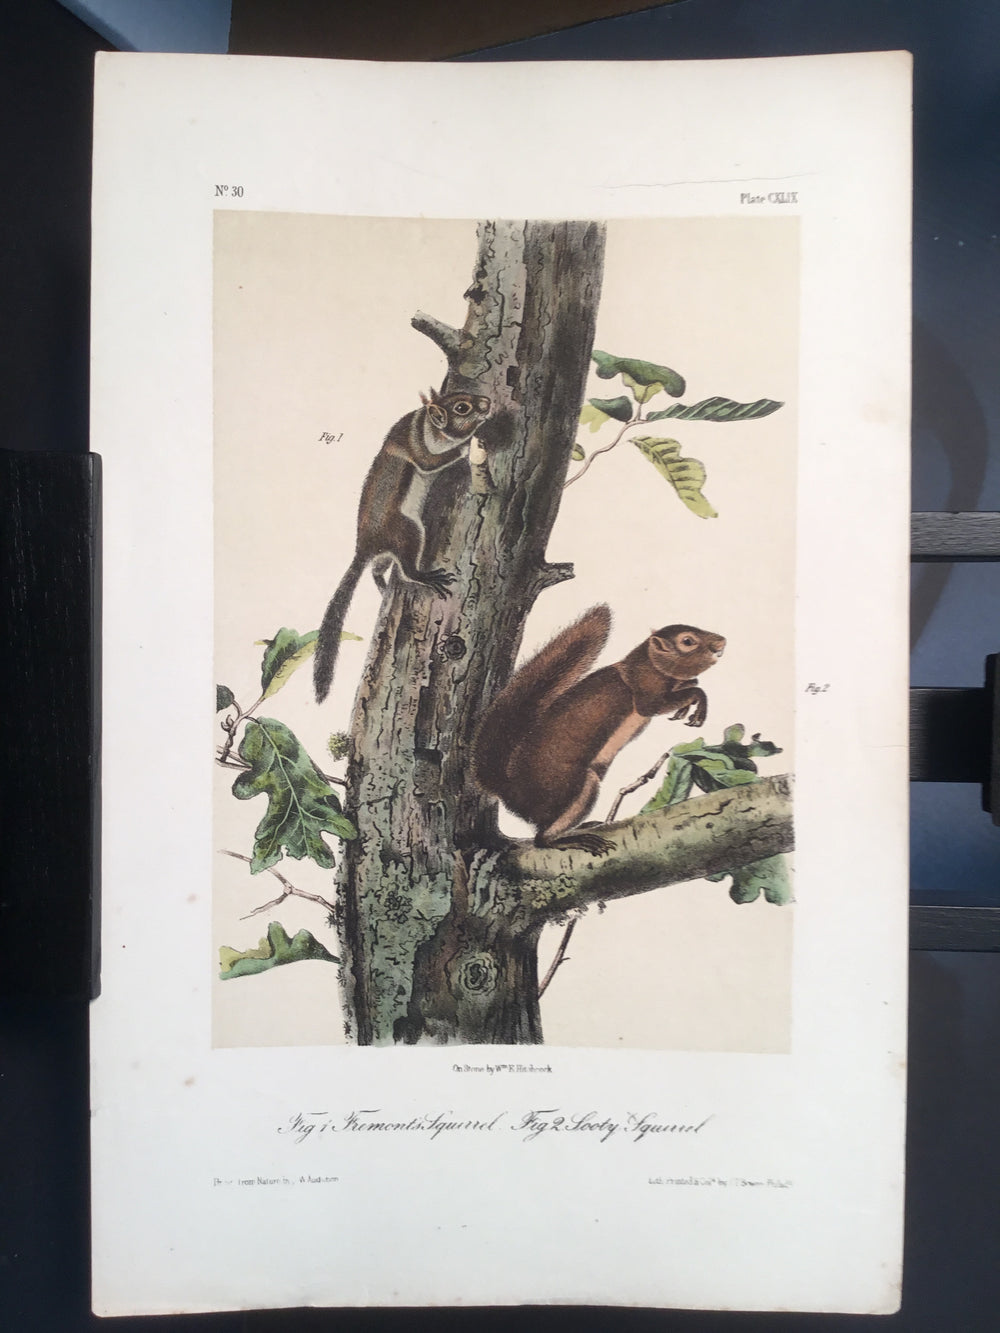 Lord-Hopkins Collection - Sooty Squirrel